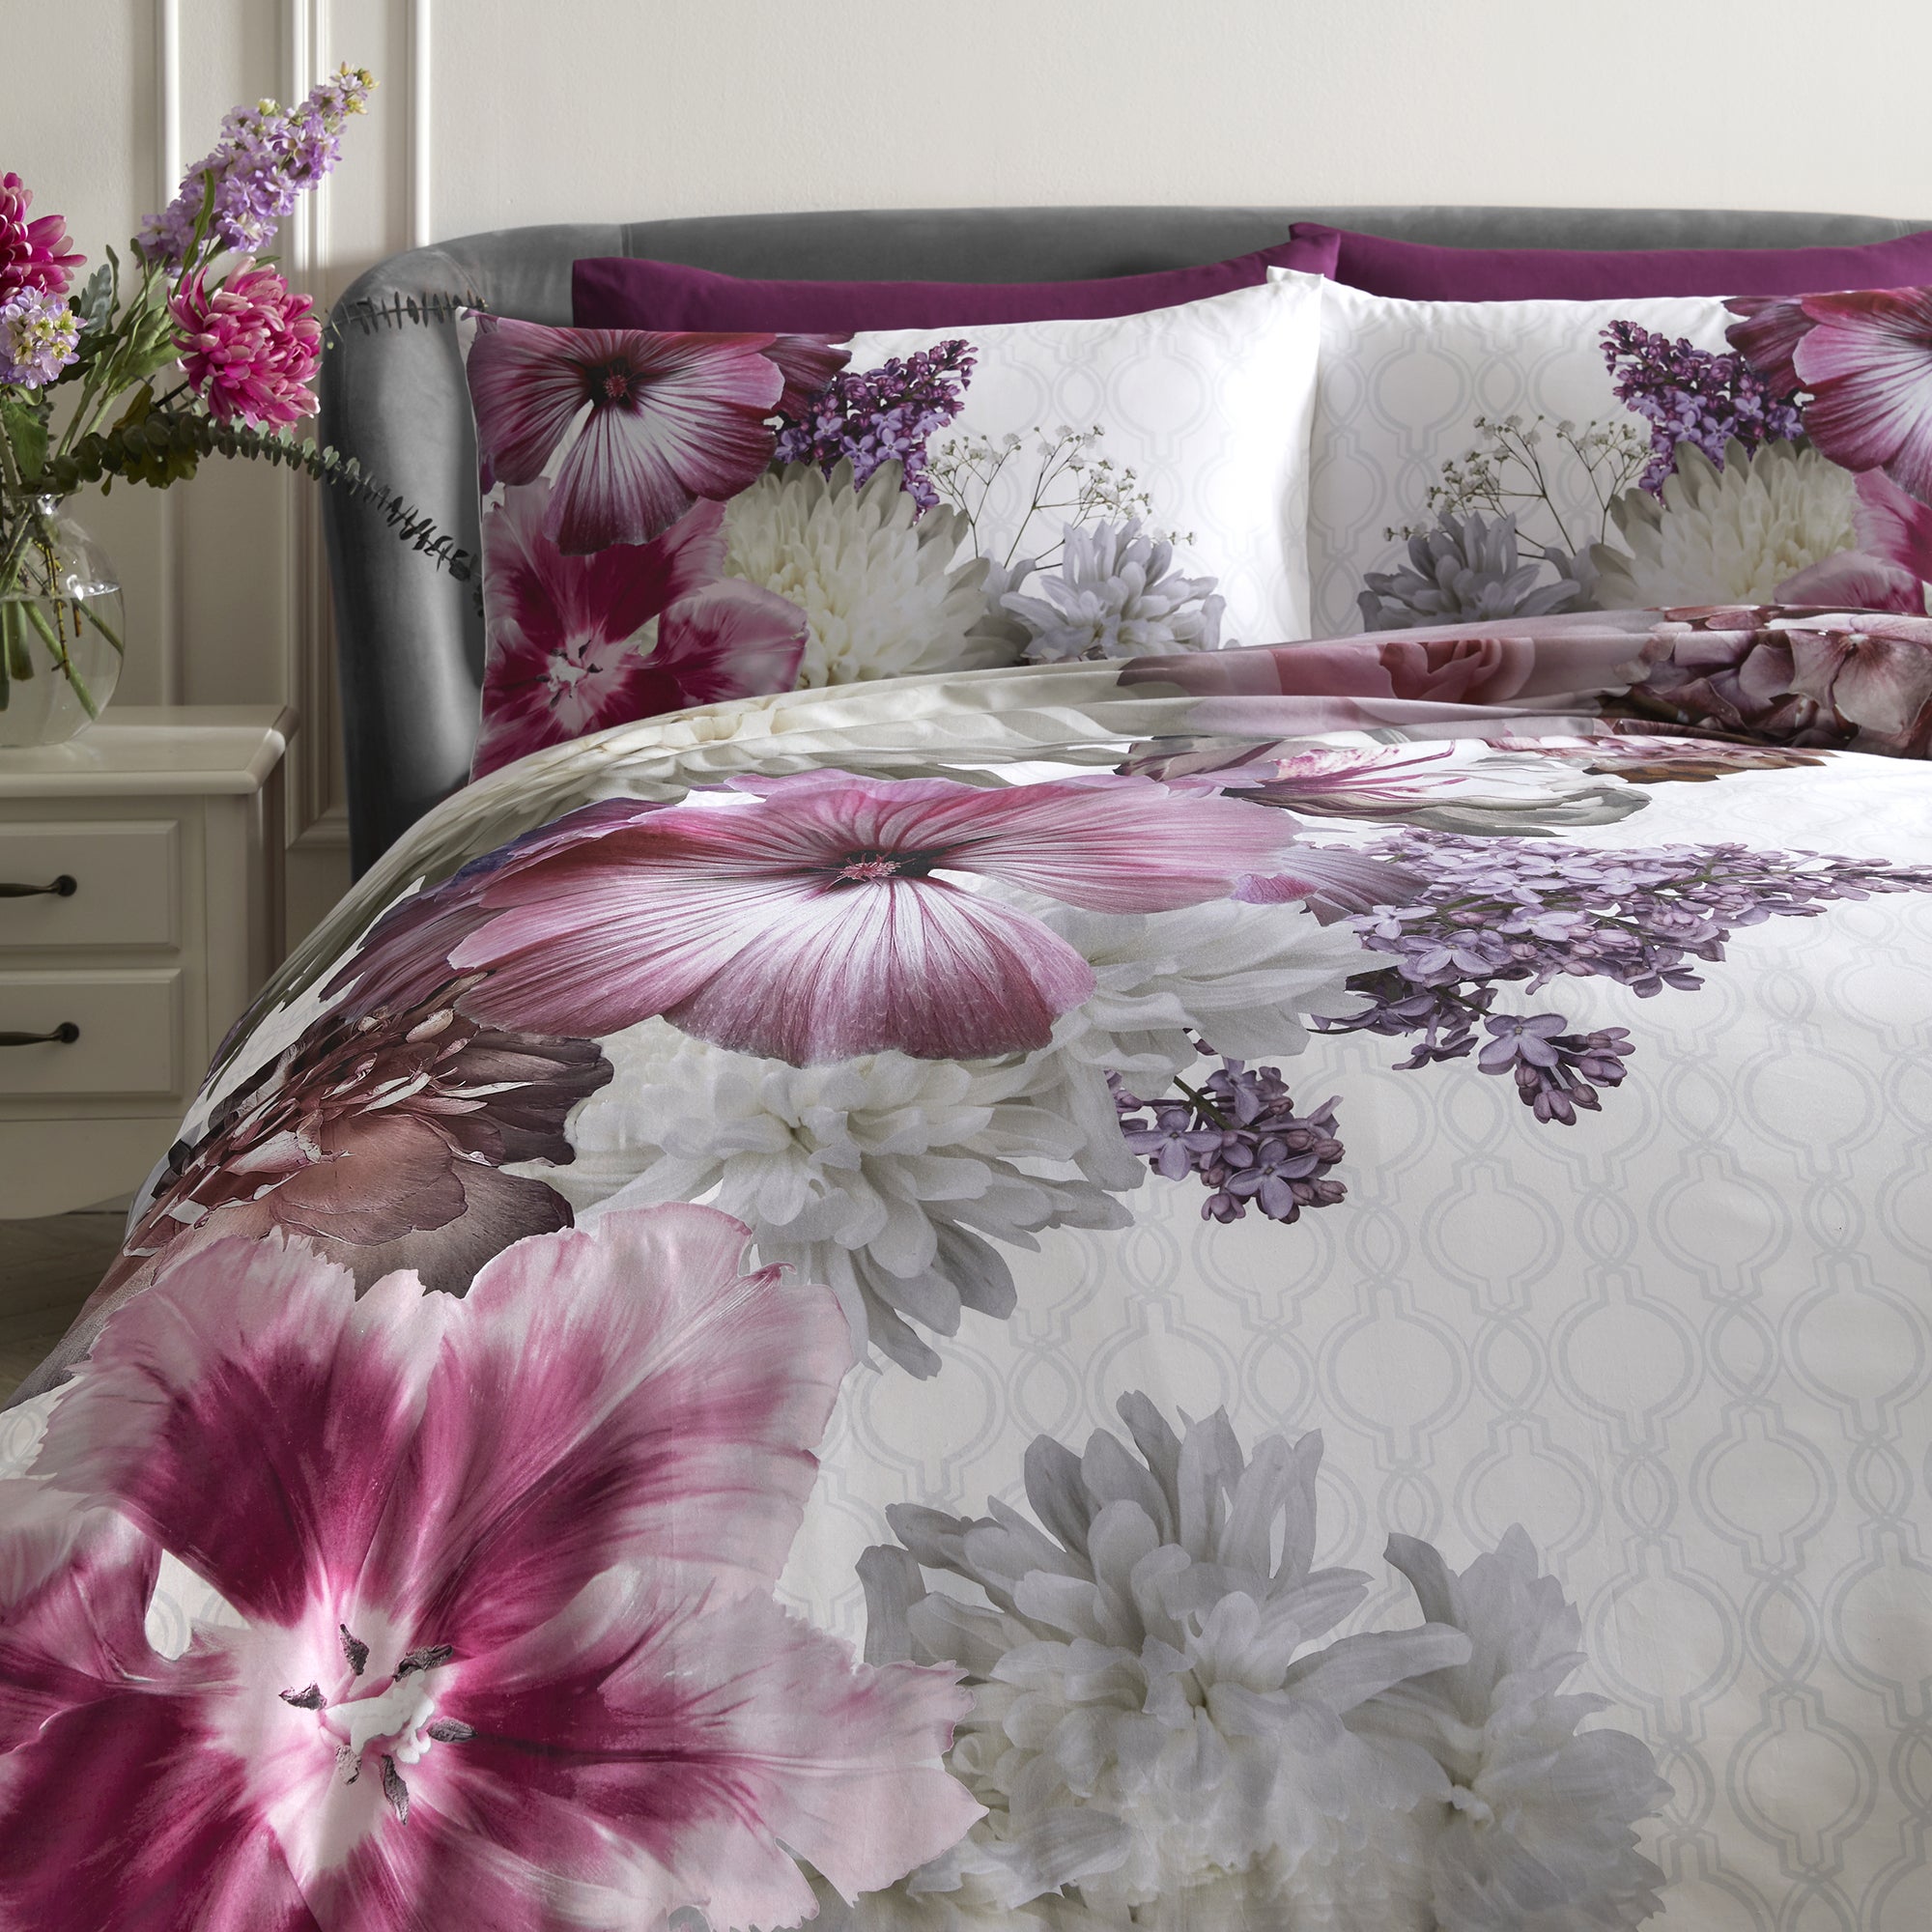 ?Laurence Llewelyn-Bowen Mayfair Lady 100% Cotton Duvet Cover and Pillowcase Set Pink, Purple and White